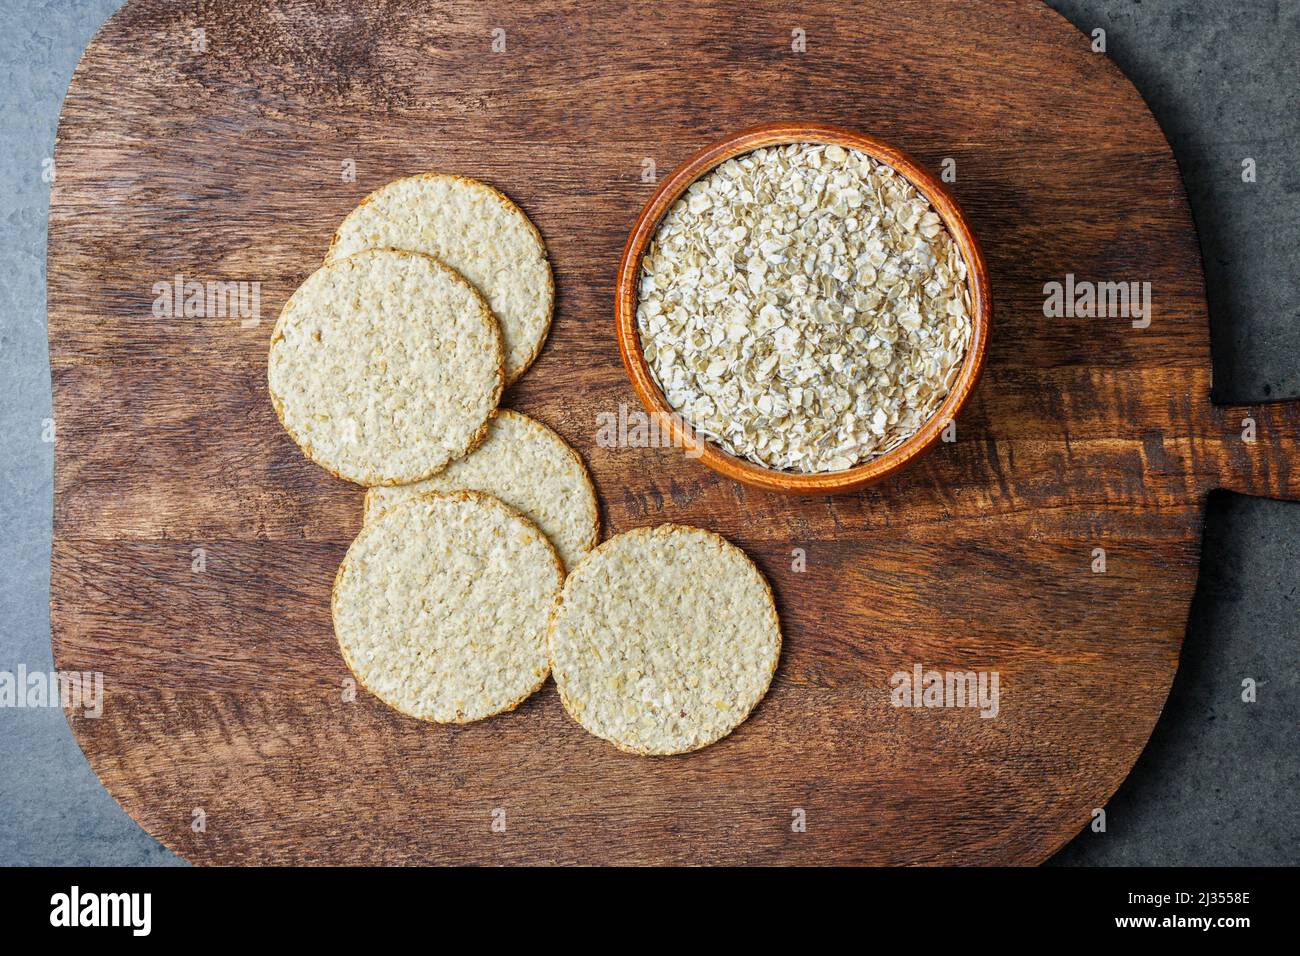 Healthy crackers made from oatmeal next to rolled oats. Stock Photo